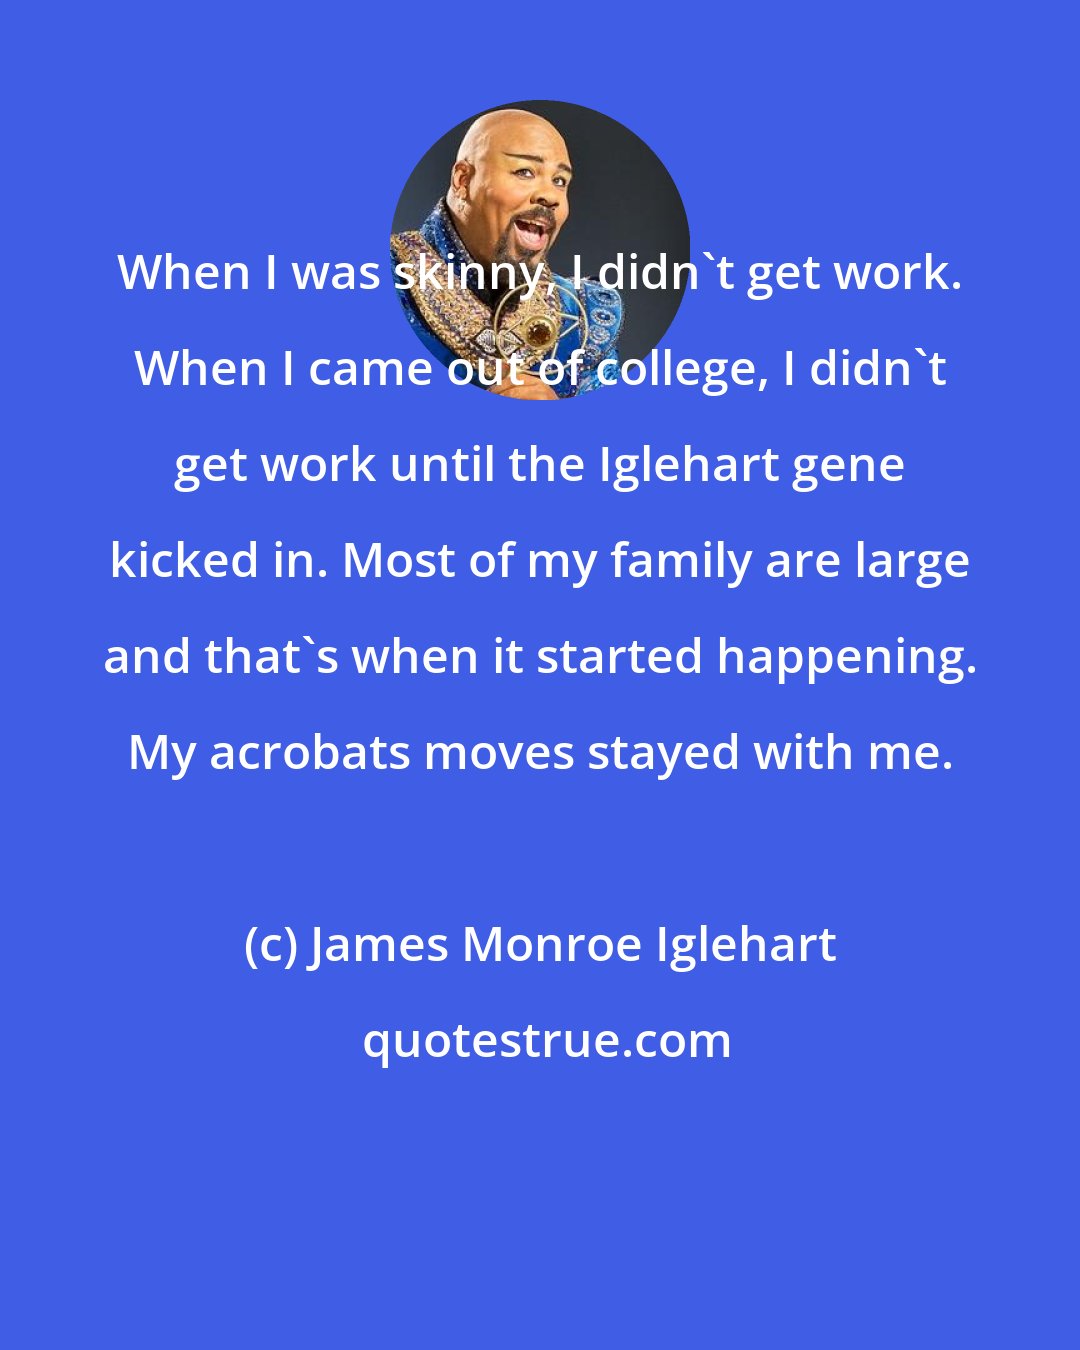 James Monroe Iglehart: When I was skinny, I didn't get work. When I came out of college, I didn't get work until the Iglehart gene kicked in. Most of my family are large and that's when it started happening. My acrobats moves stayed with me.